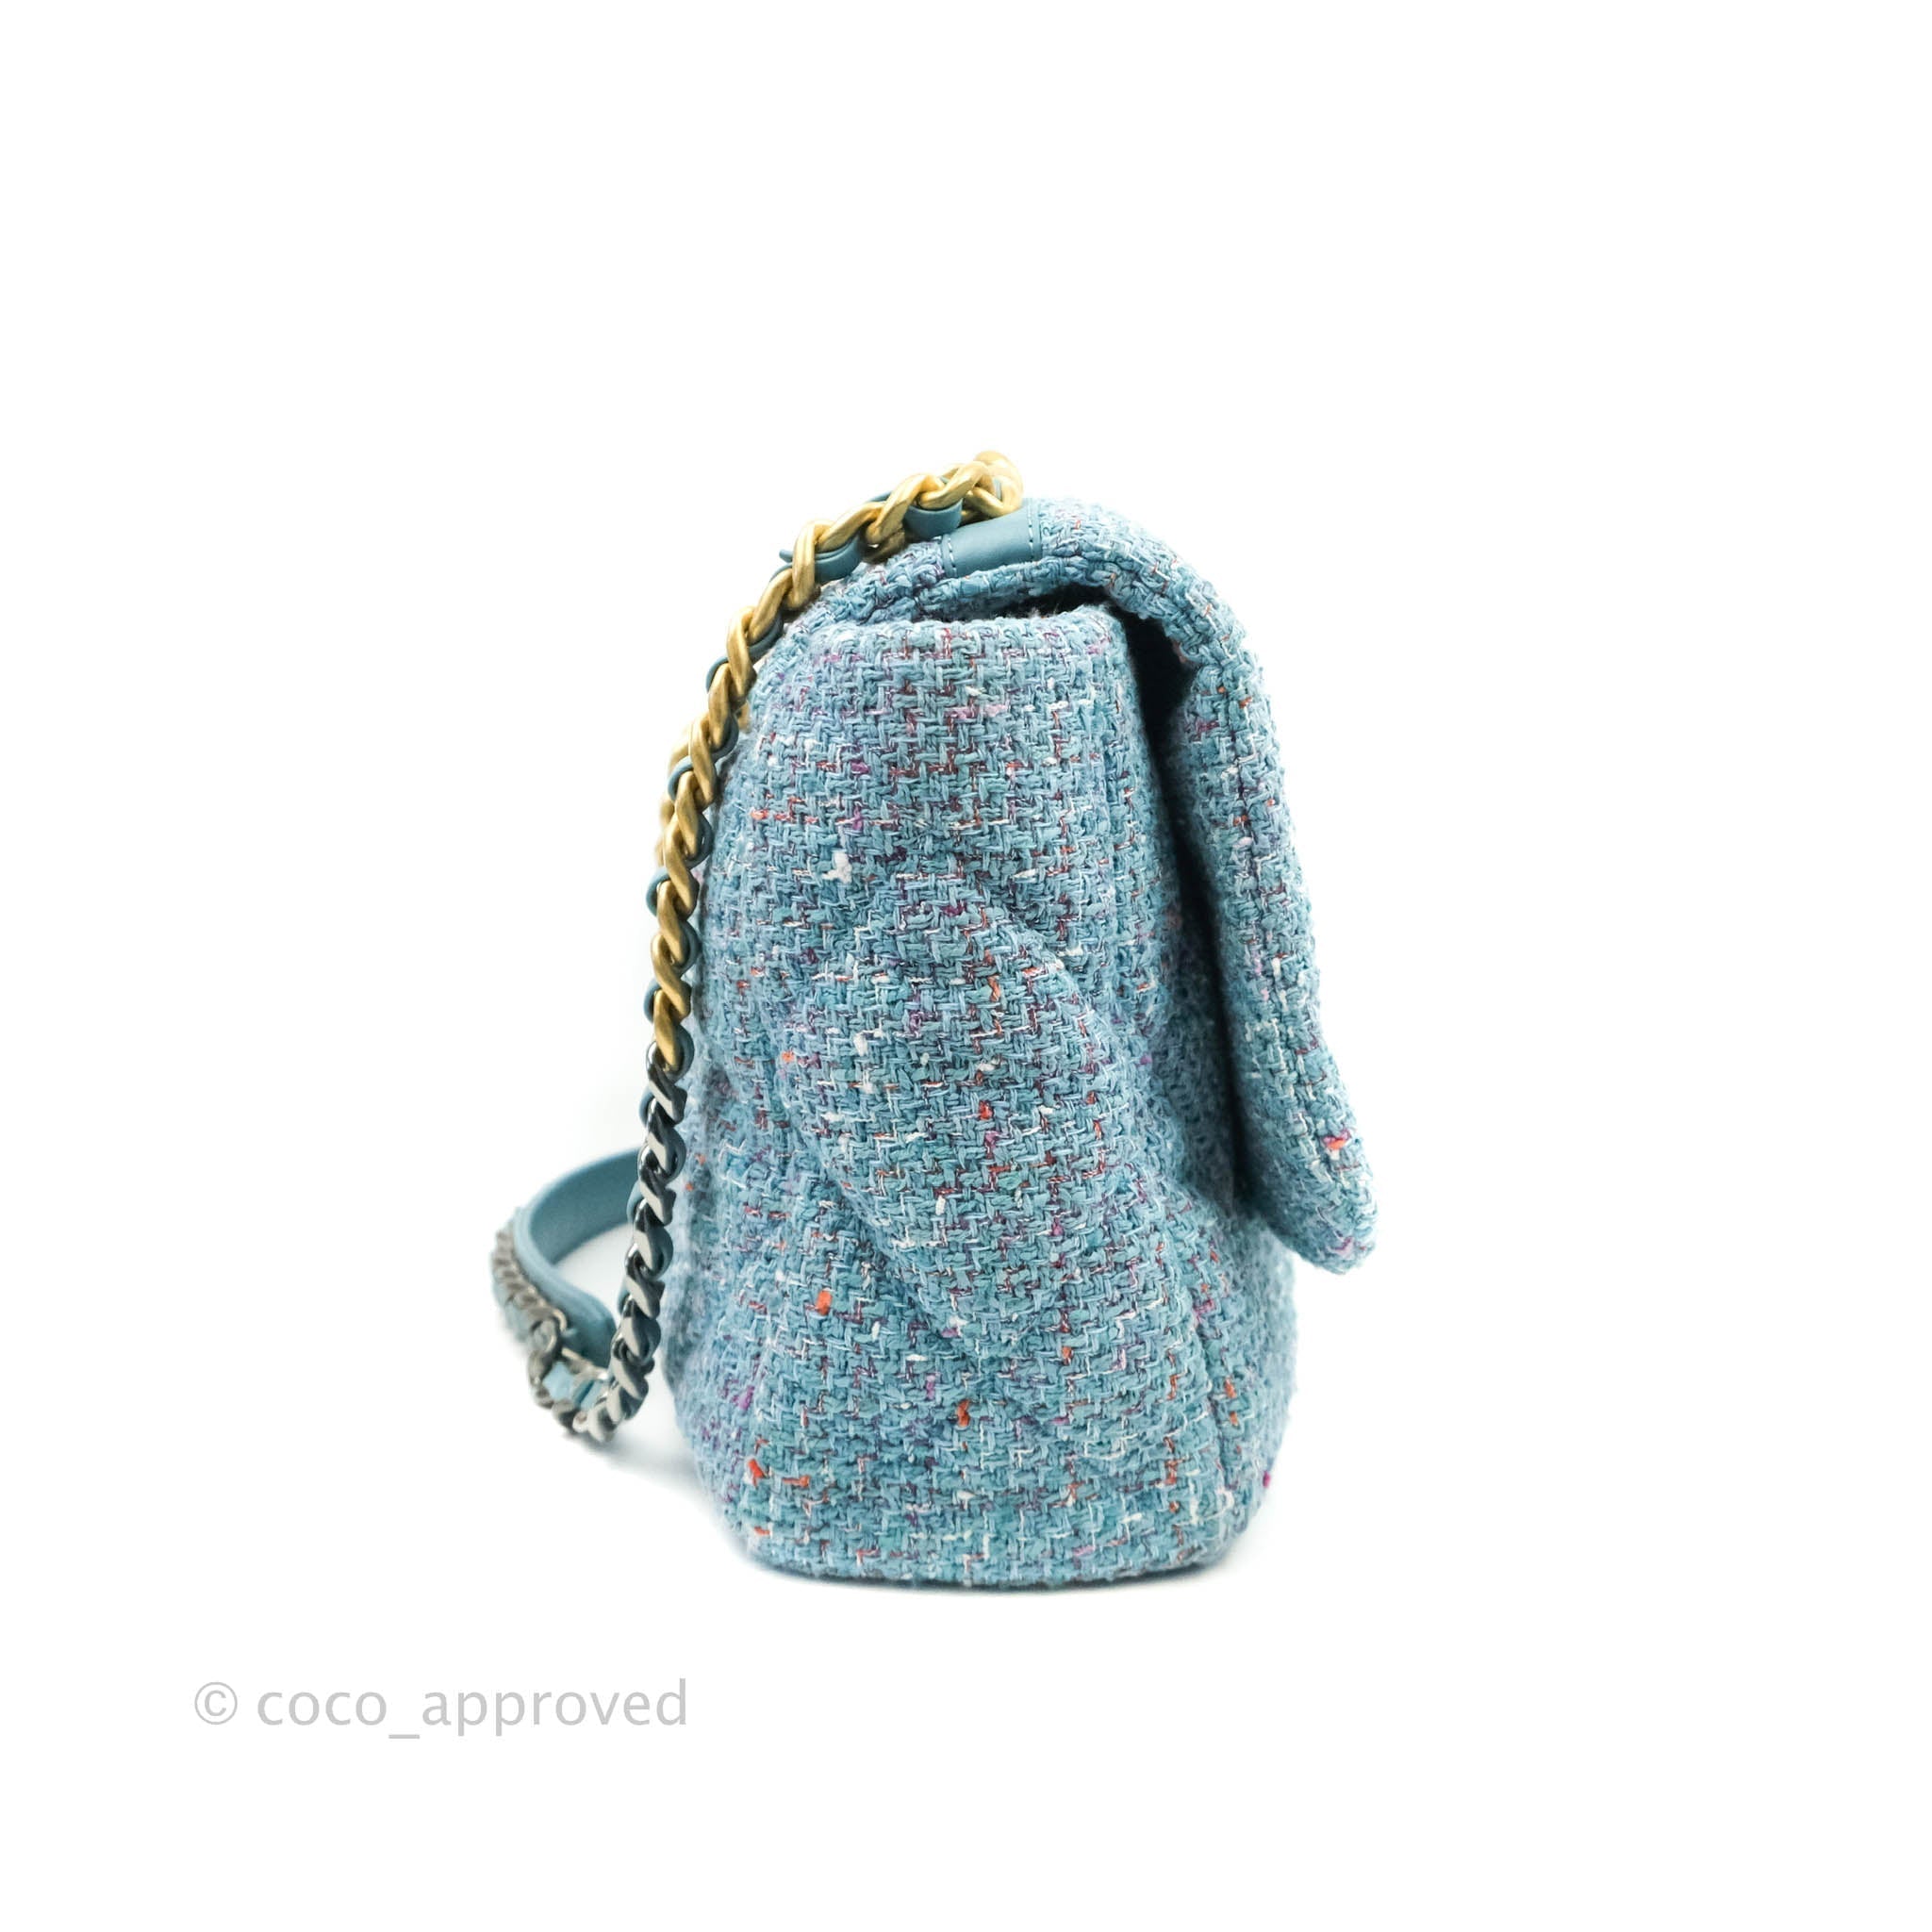 Chanel 19 Maxi Flap Bag Blue Tweed Mixed Hardware – Coco Approved Studio